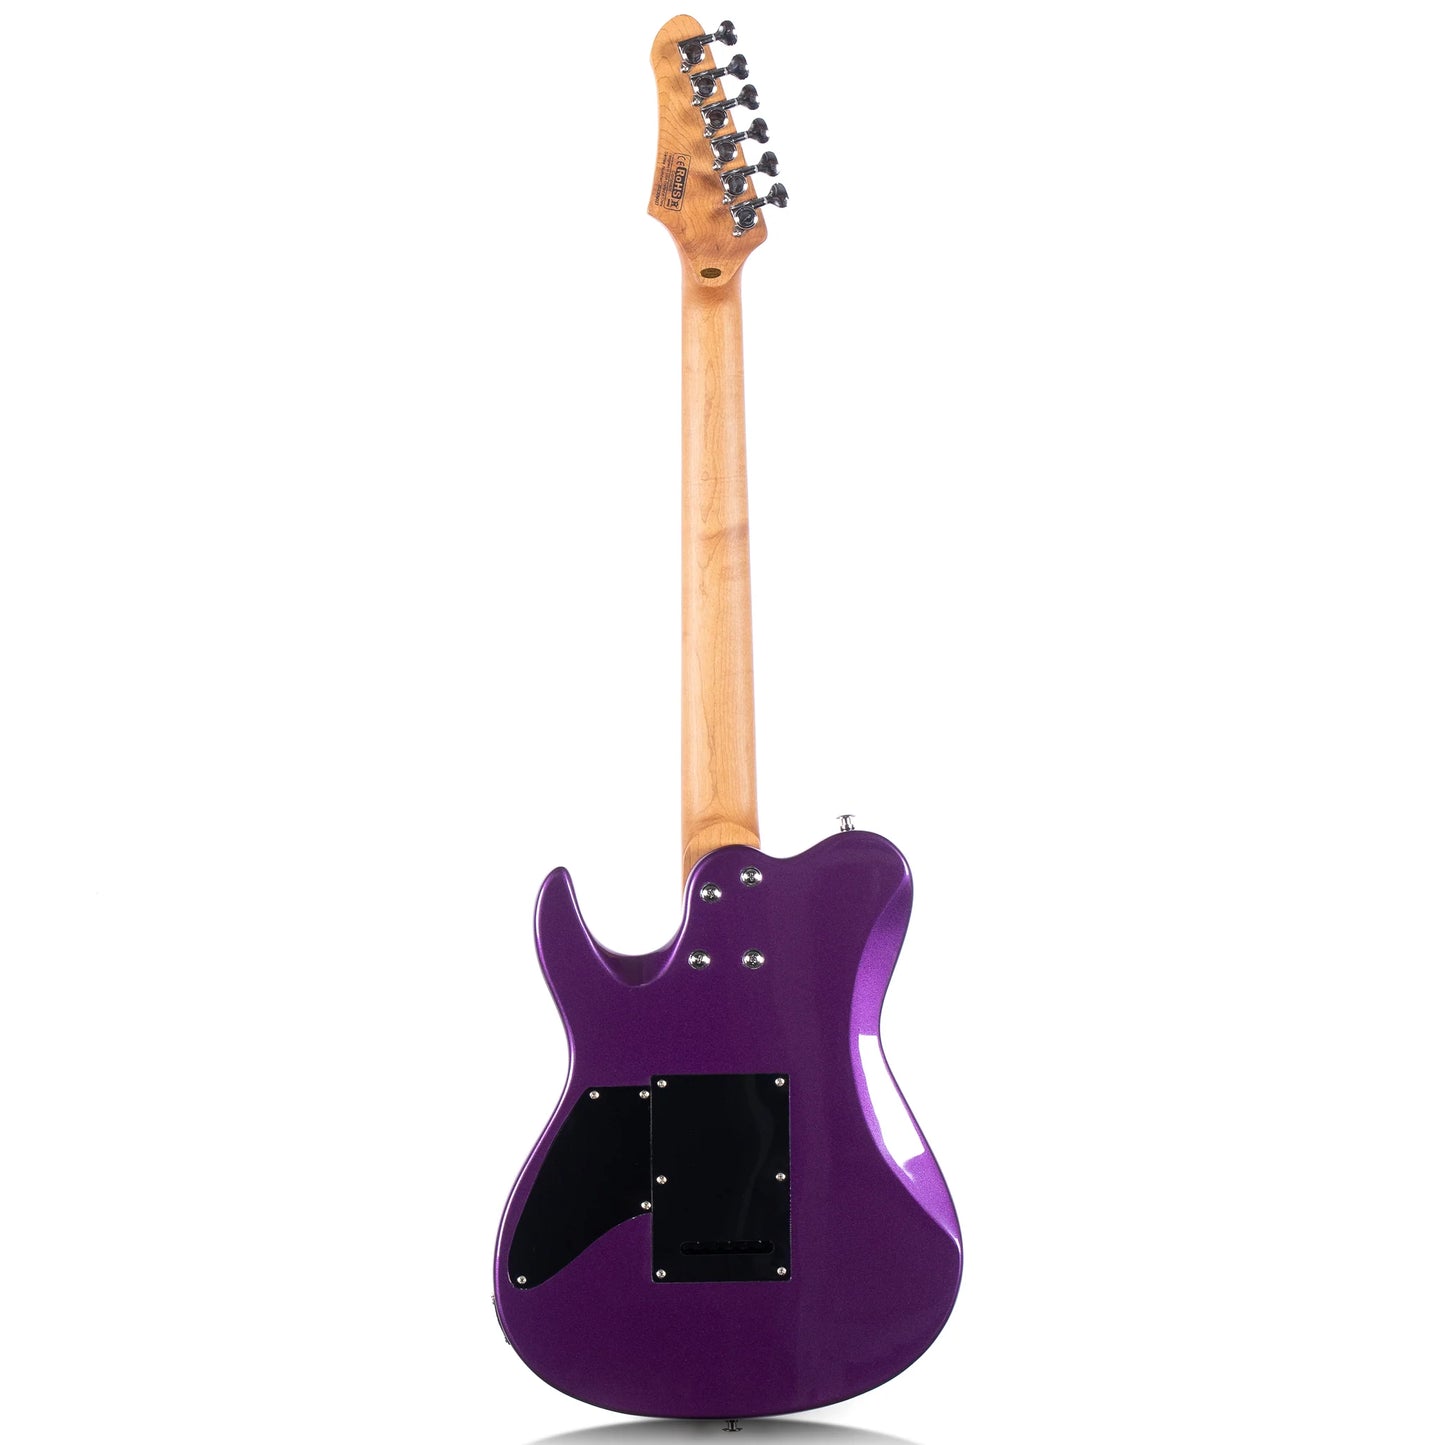 GROTE SOLID ELECTRIC GUITAR GR-MODERN-T METALLIC FINISH POPLAR BODY ROASTED MAPLE NECK COILS SPLITTING PICKUP WITH GIGBAG